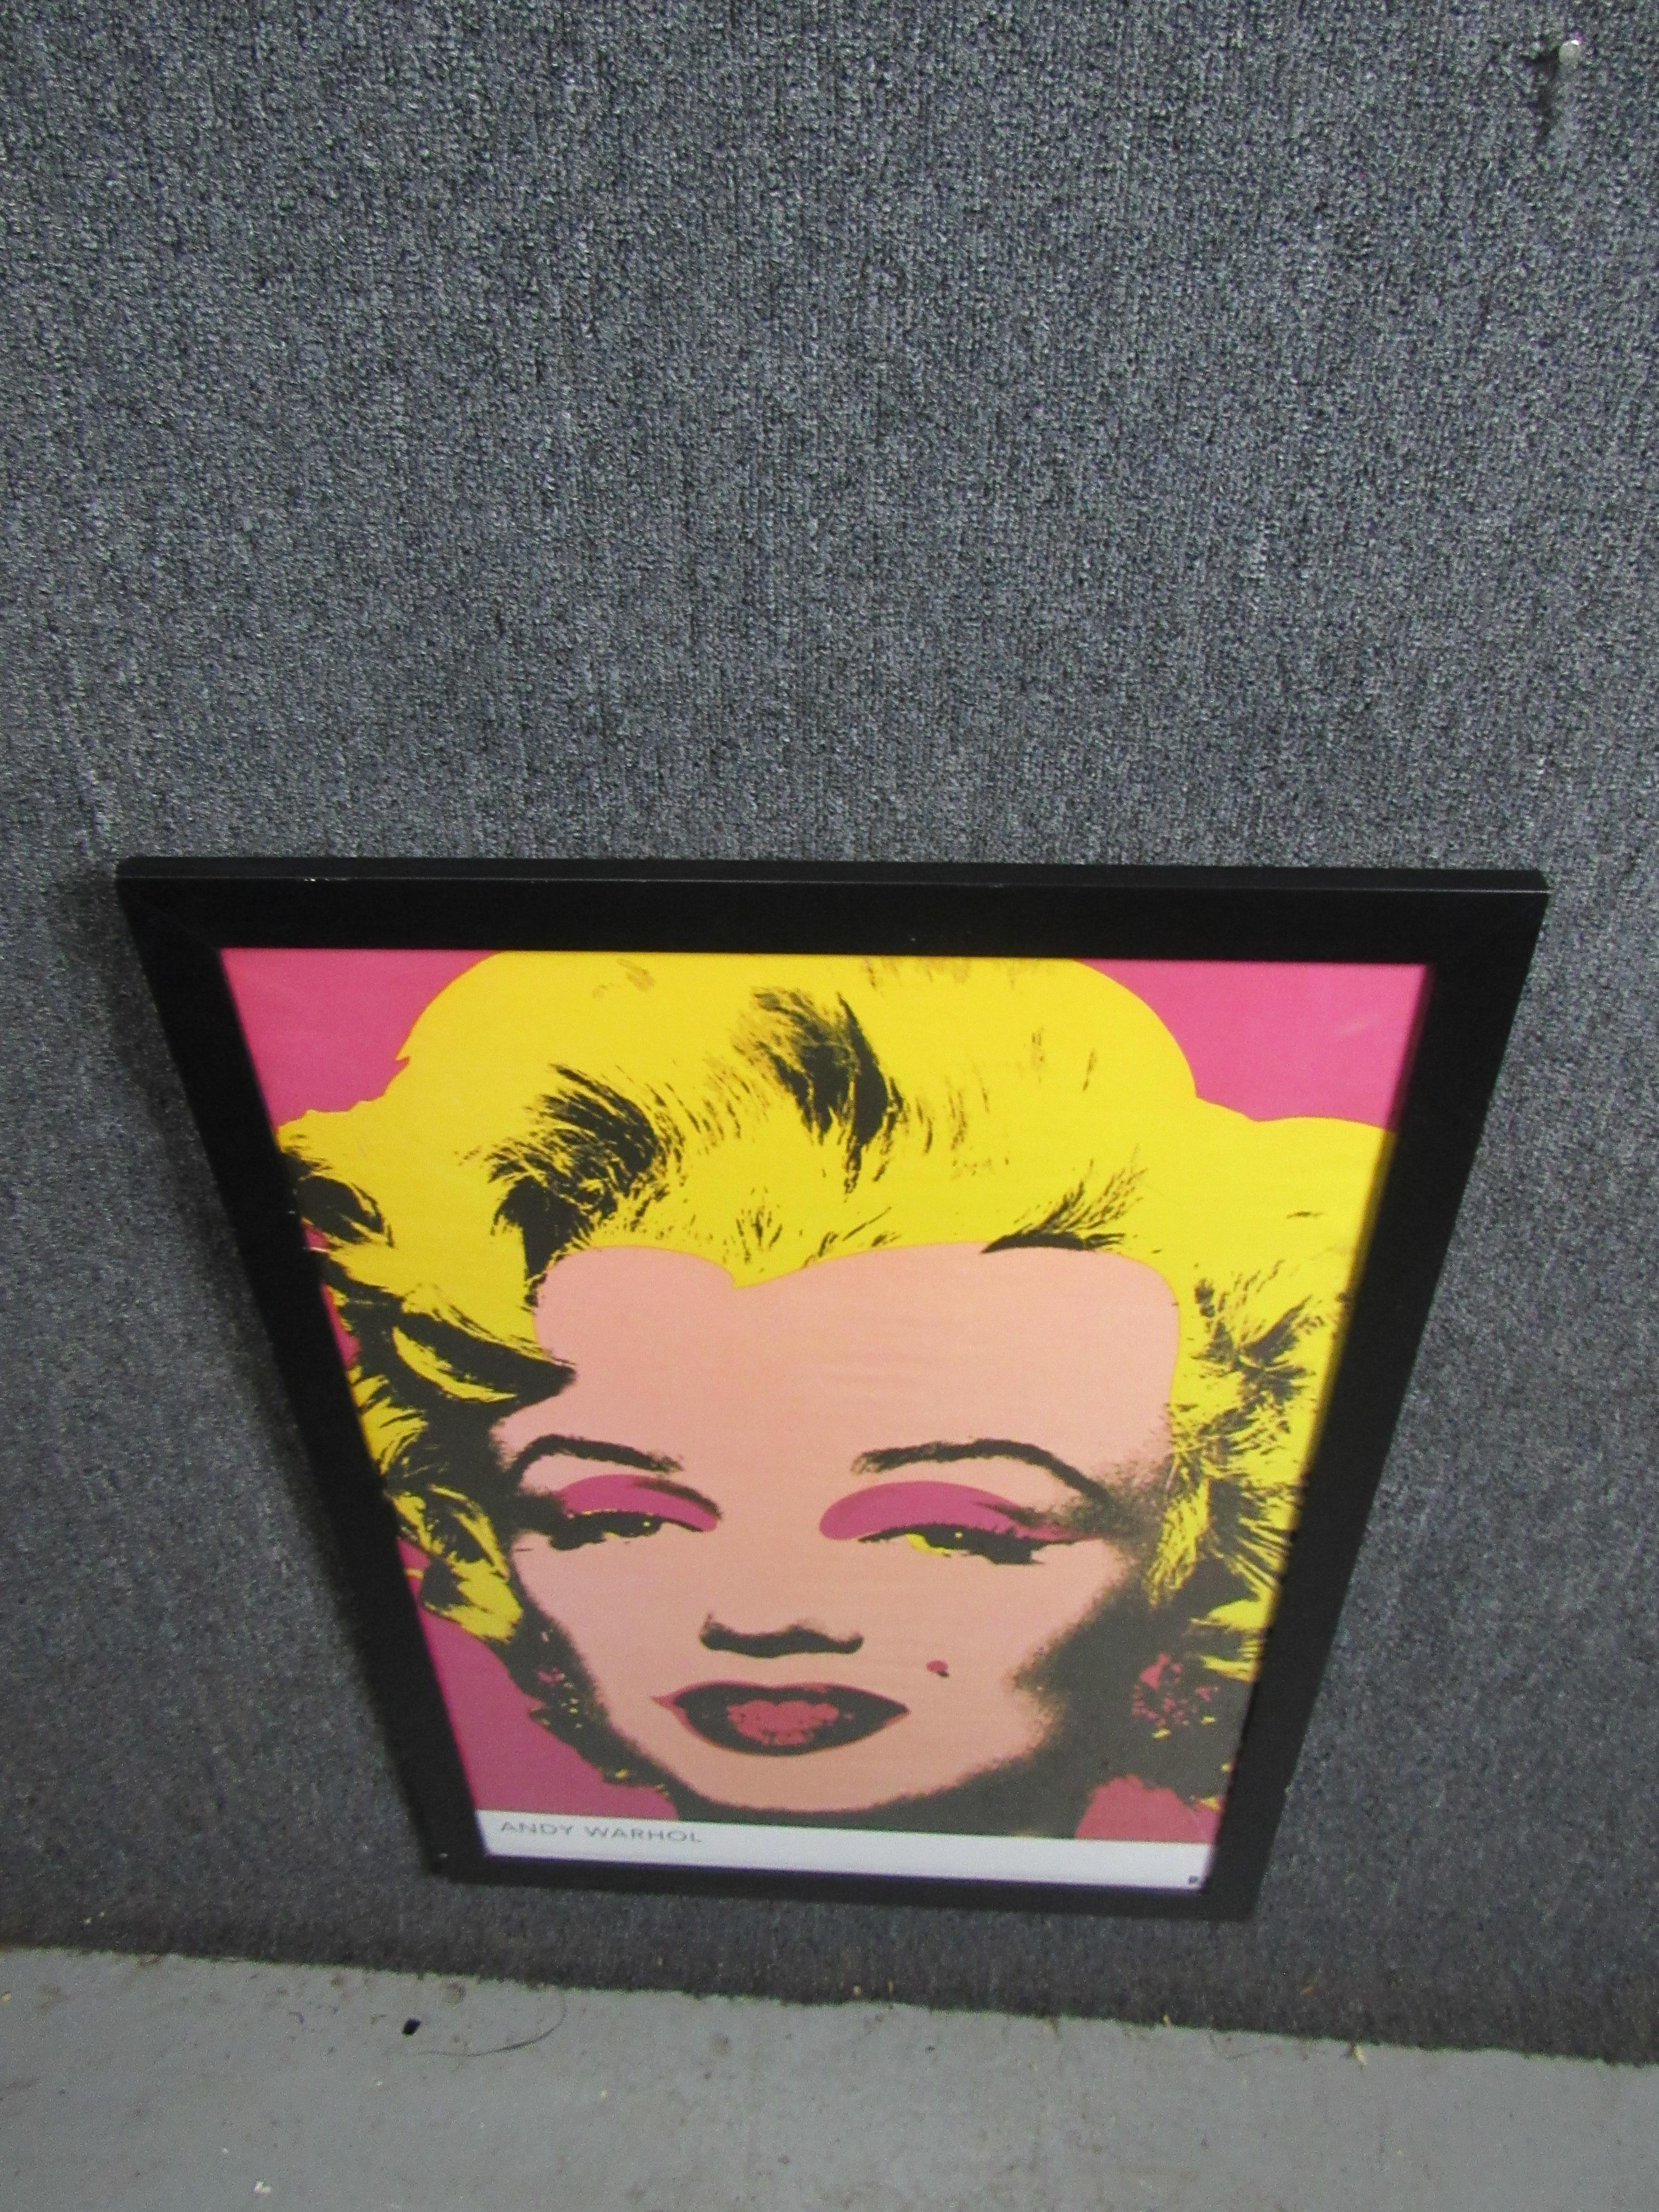 Mid-Century Modern Vintage Framed Marilyn Monroe by Andy Warhol Poster For Sale